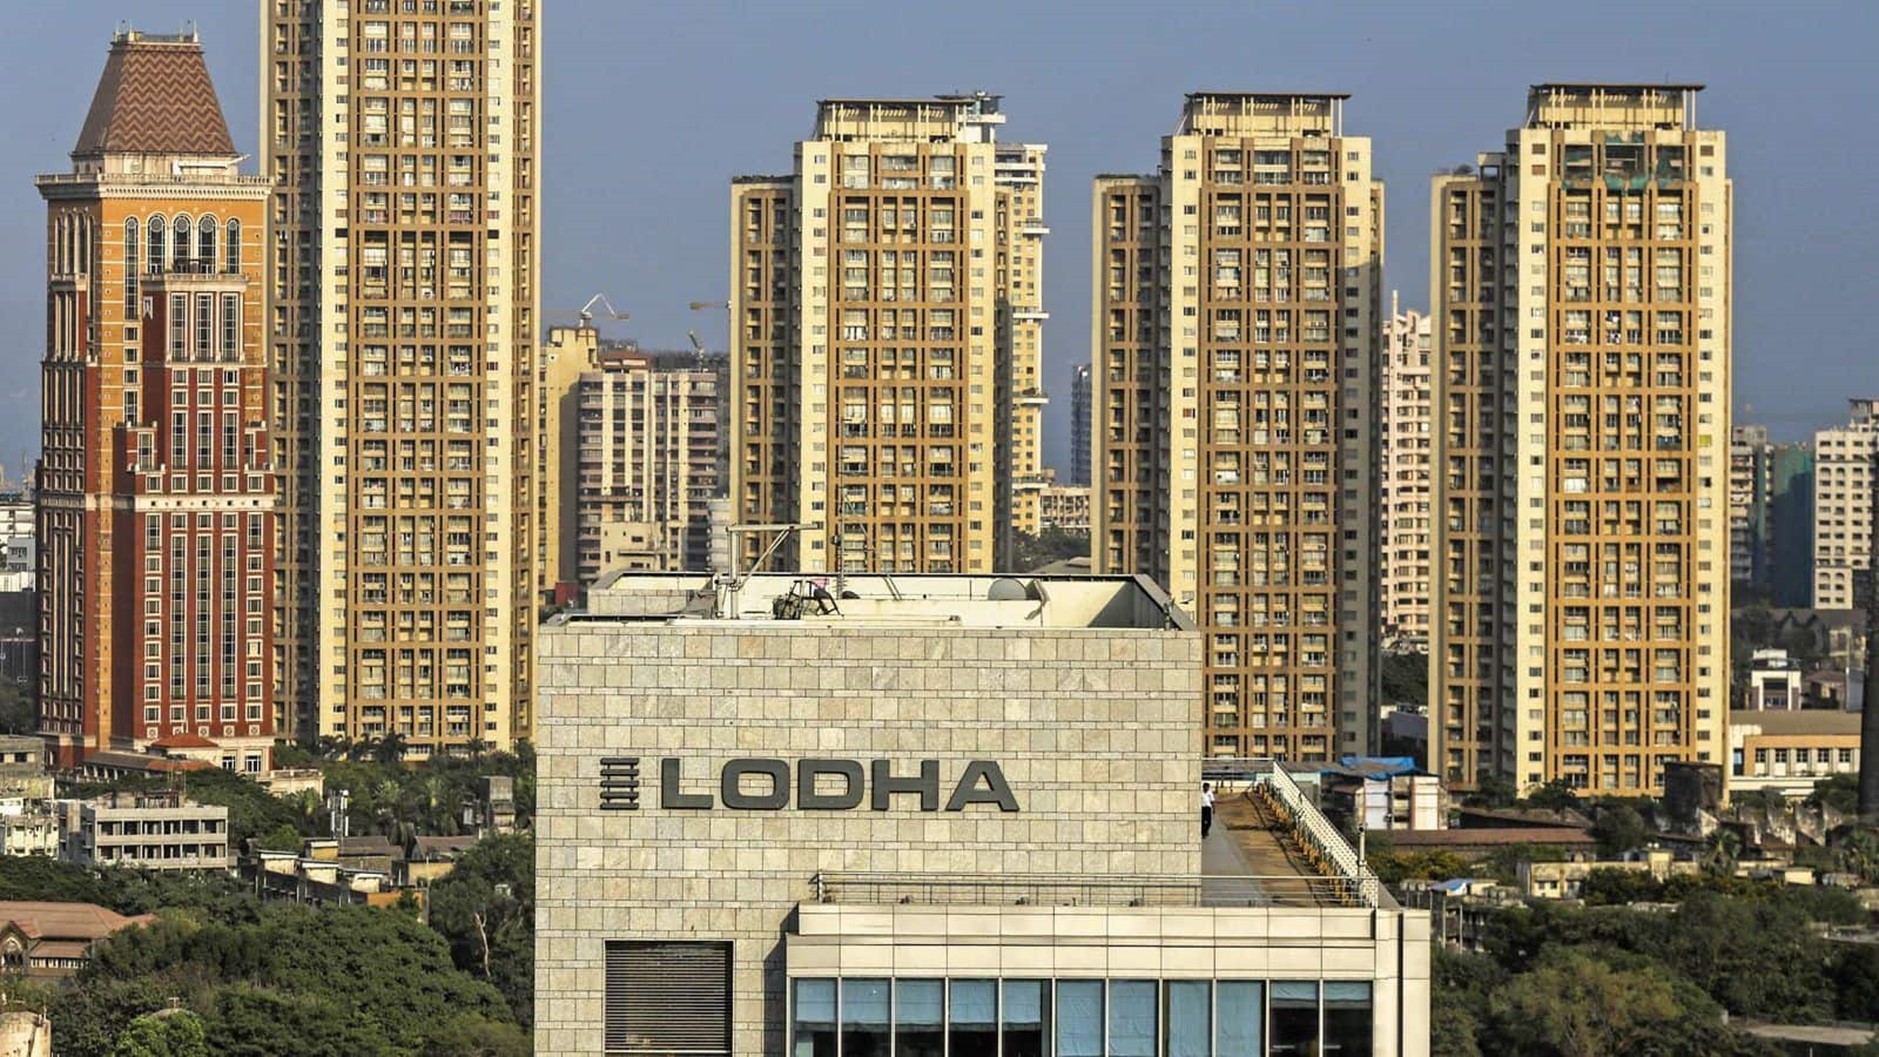 Lodha 3rd Most Sustainable In Real Estate Management & Development Industry